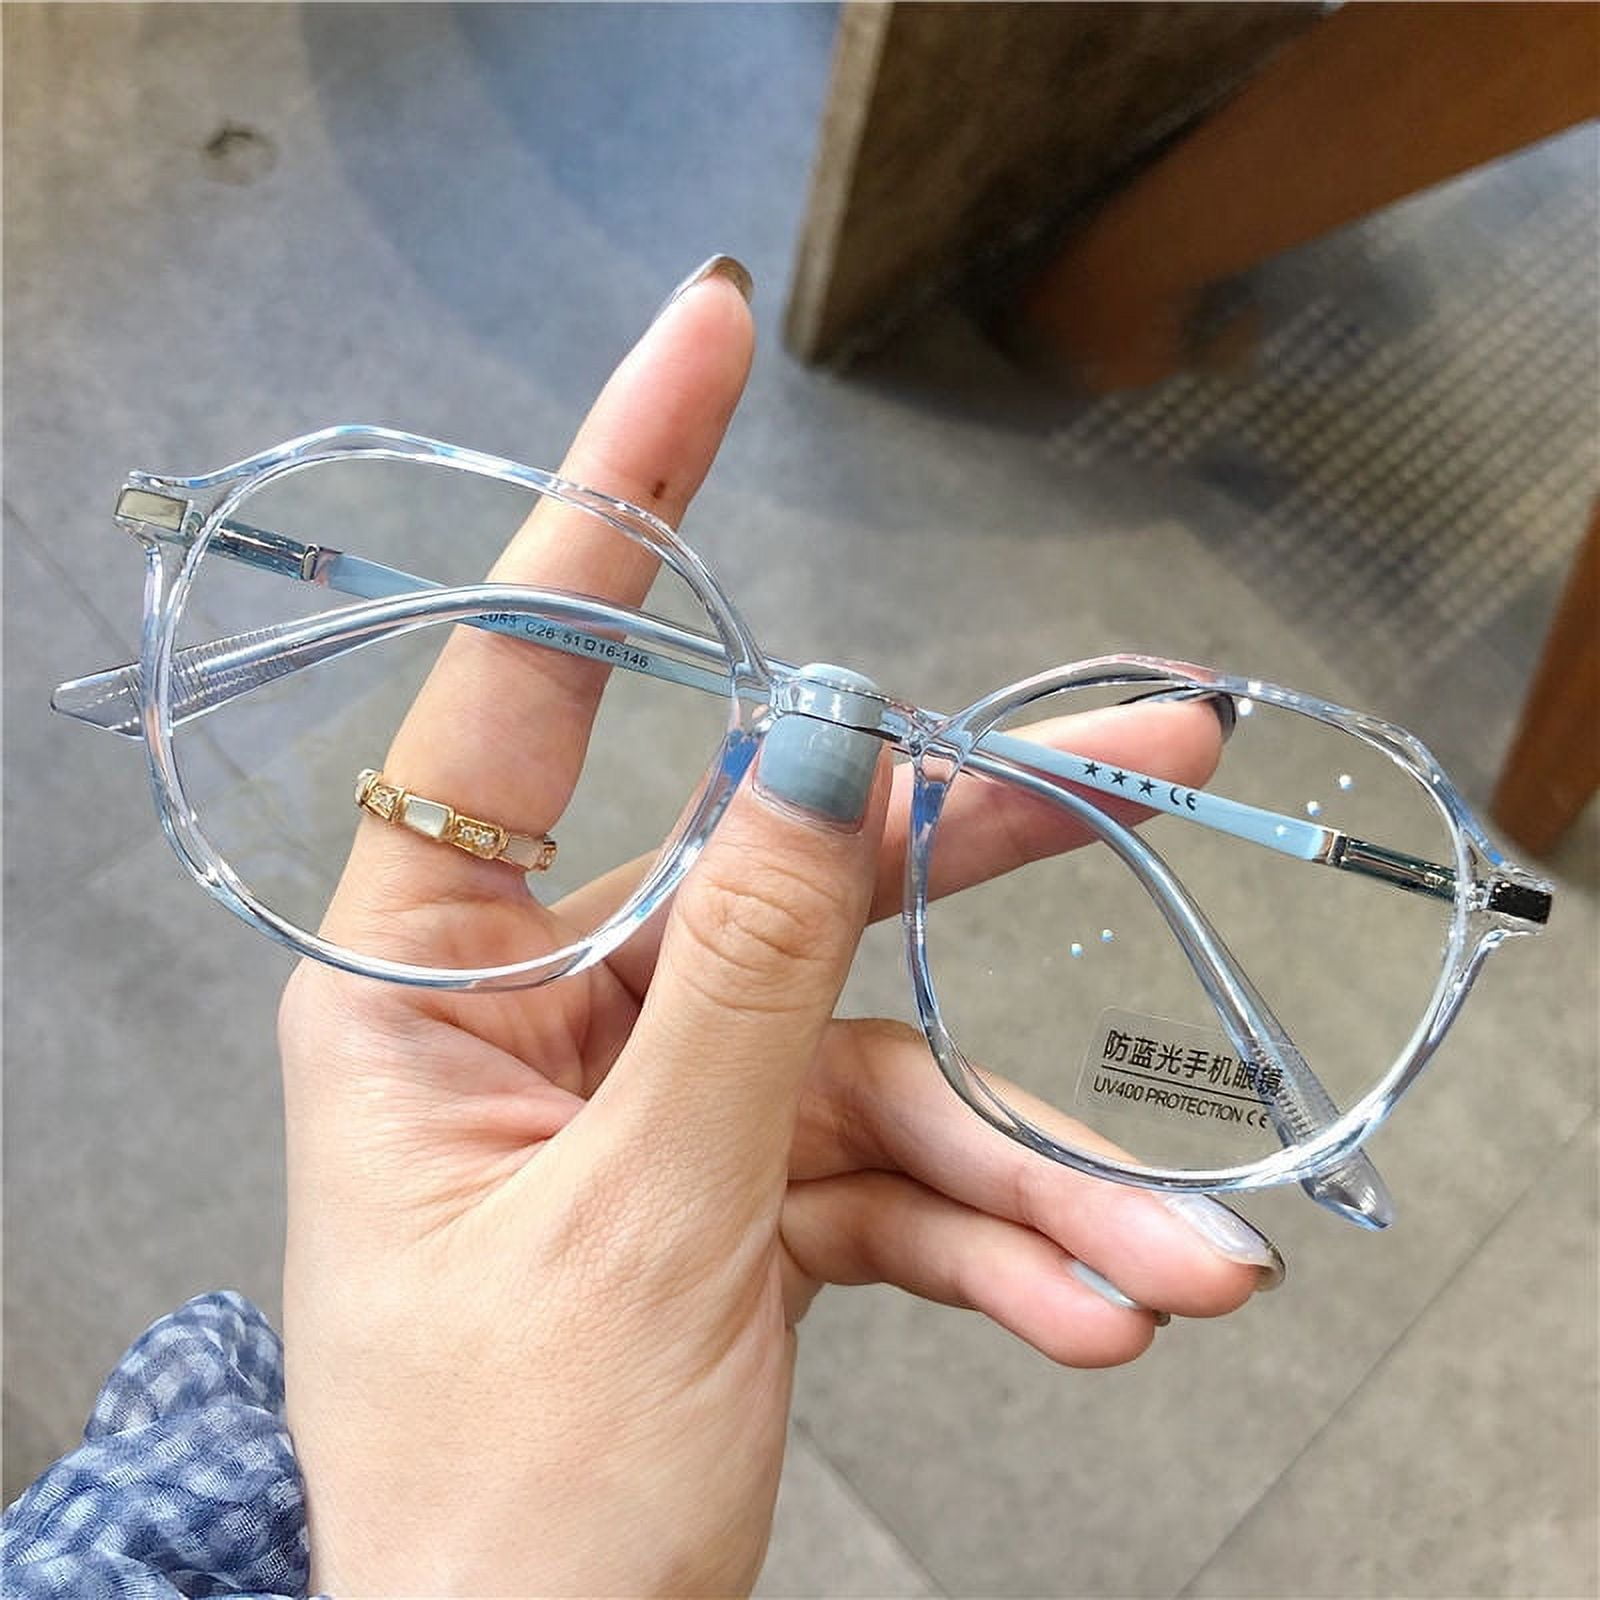 Blue Light Blocking Glasses Cute Anti Eye Strain Fashion Polygonal Frame Glasses for Reading Play Computer New, Size: One Size